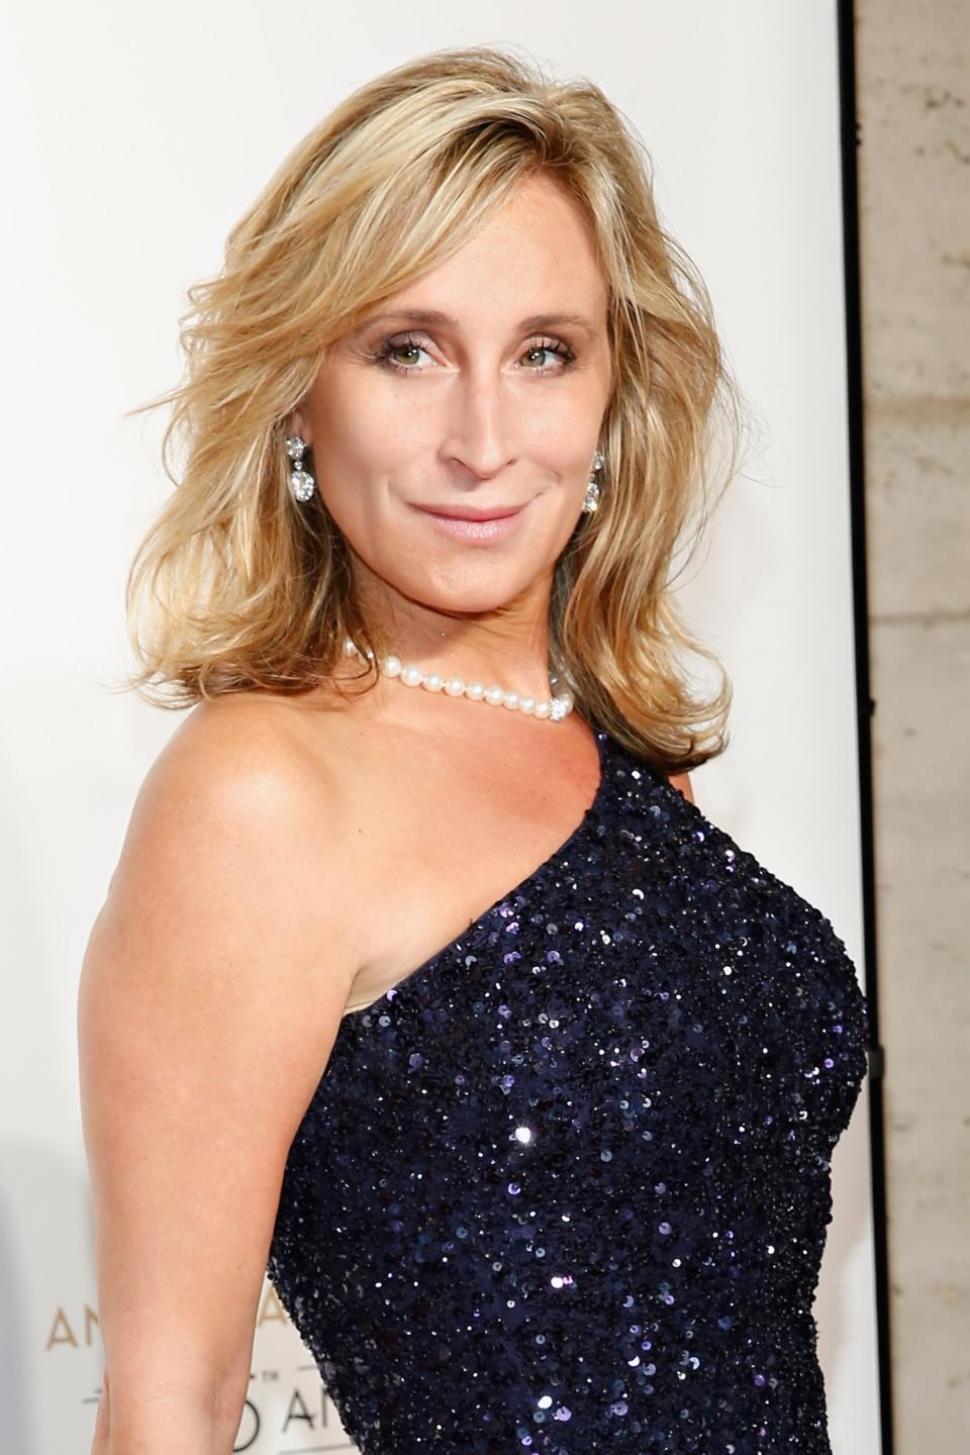 'Real Housewives of New York' star Sonja Morgan was out on the prowl in Midtown on Thursday, a spy says. 